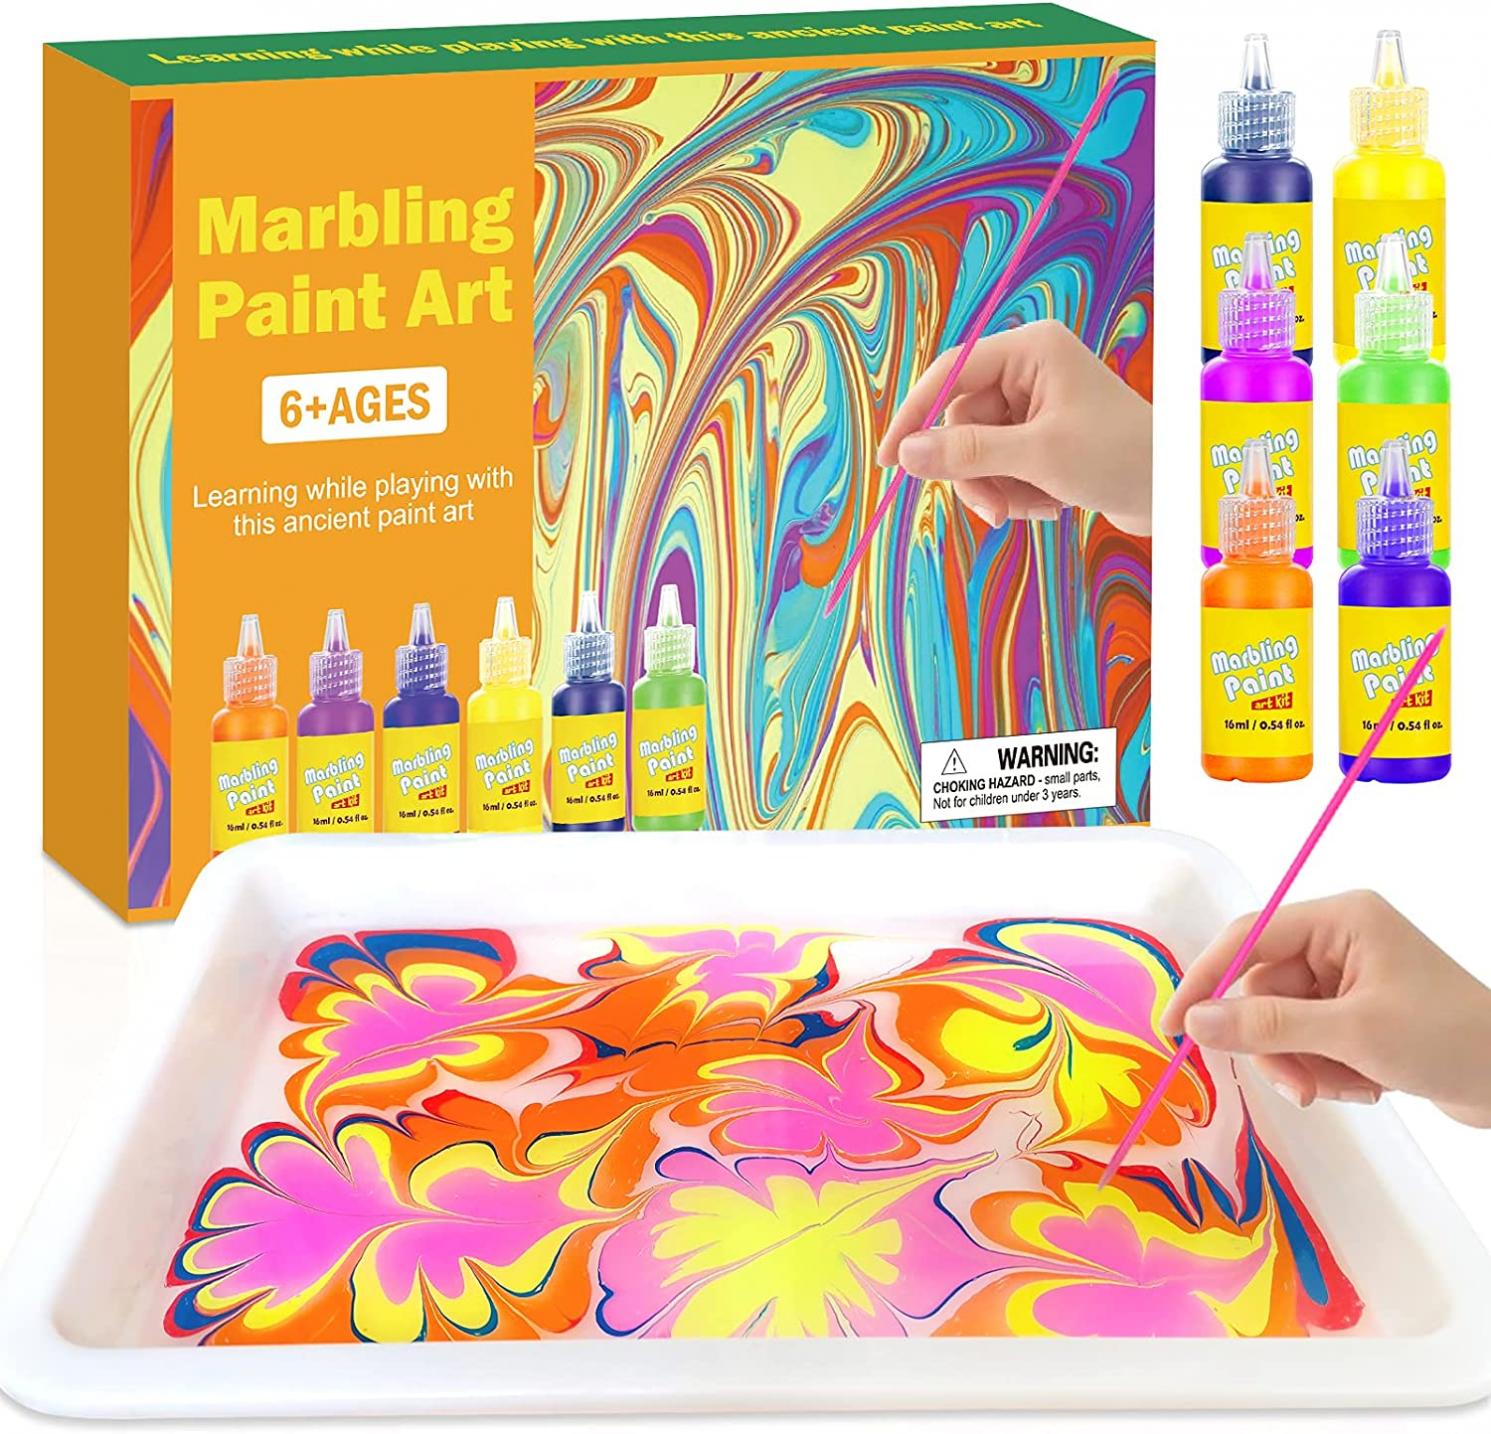 MFJL Marbling Paint Crafts Kit for Kids - Arts and Crafts for Girls & Boys - Ideas Art Kits for Kids Age 3-5 4-8 8-12 (Paint on Water)